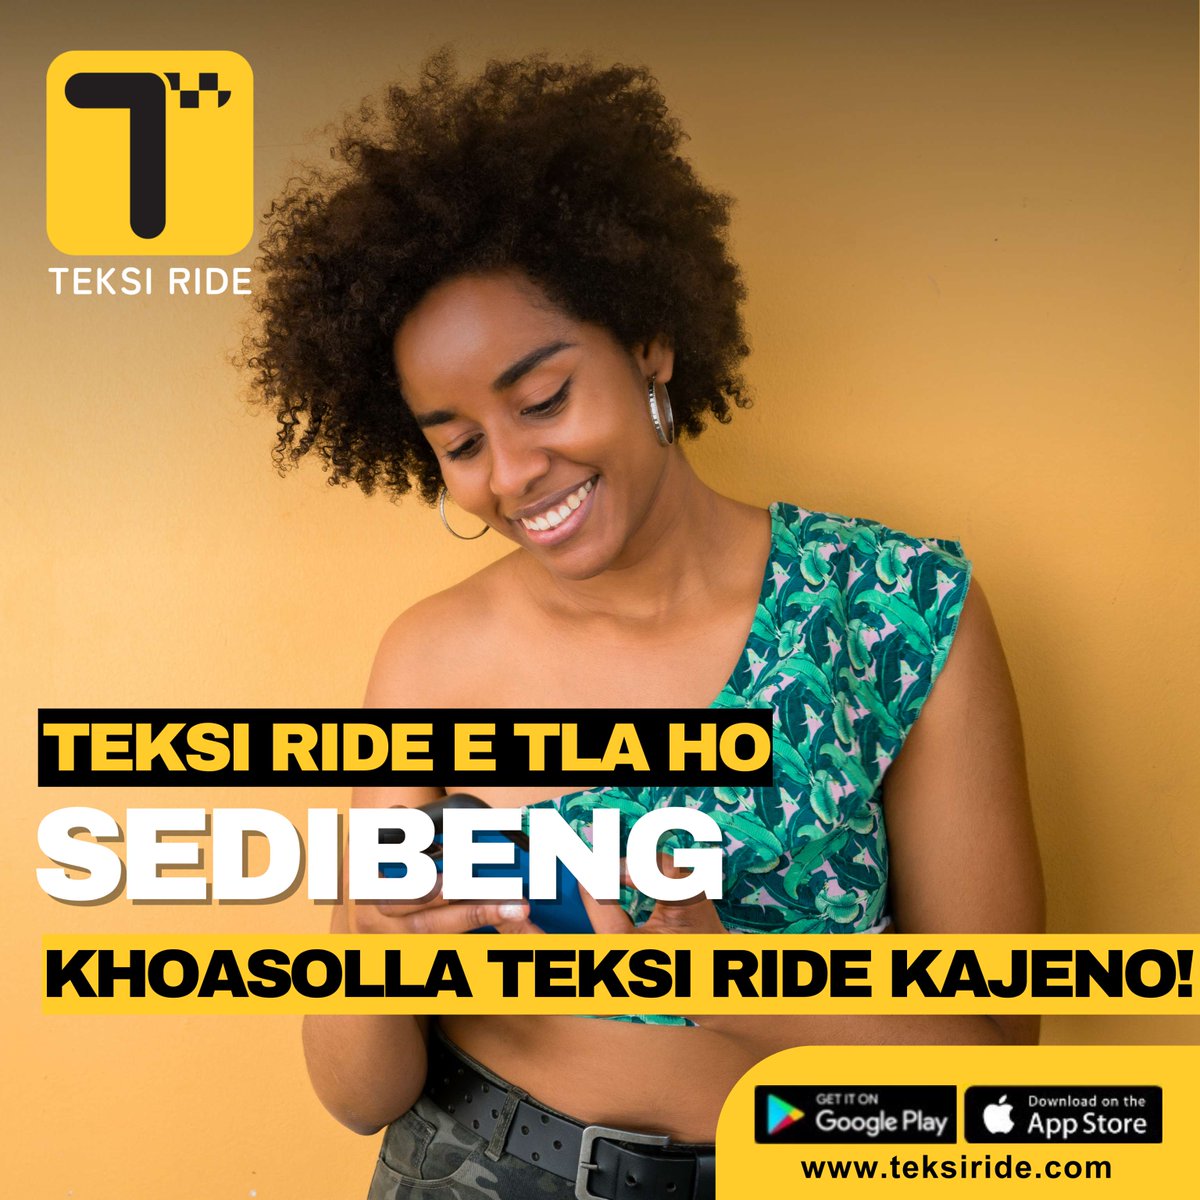 EXCITING NEWS - Vaal Triangle! Teksi Ride's zooming in to shake things up in your area soon. Mark your calendars and get set to book your first ride! 🚀

#RideTheVaalVibes#VaalTriangle #LaunchingSoon